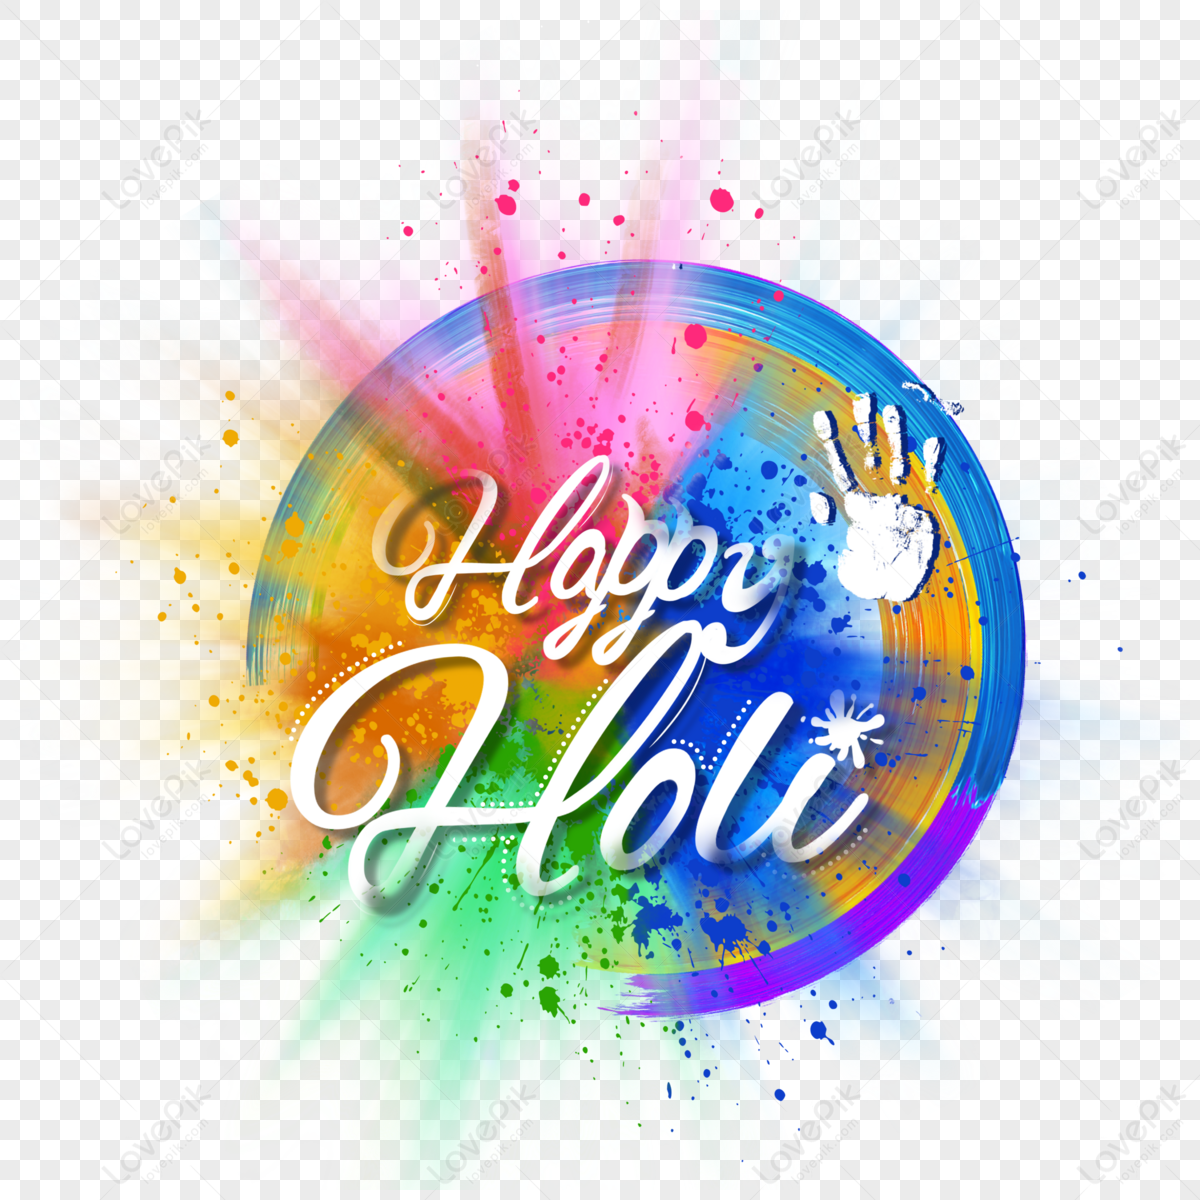 Happy Holi Png Image For Picsart and Photoshop Editing New Collection